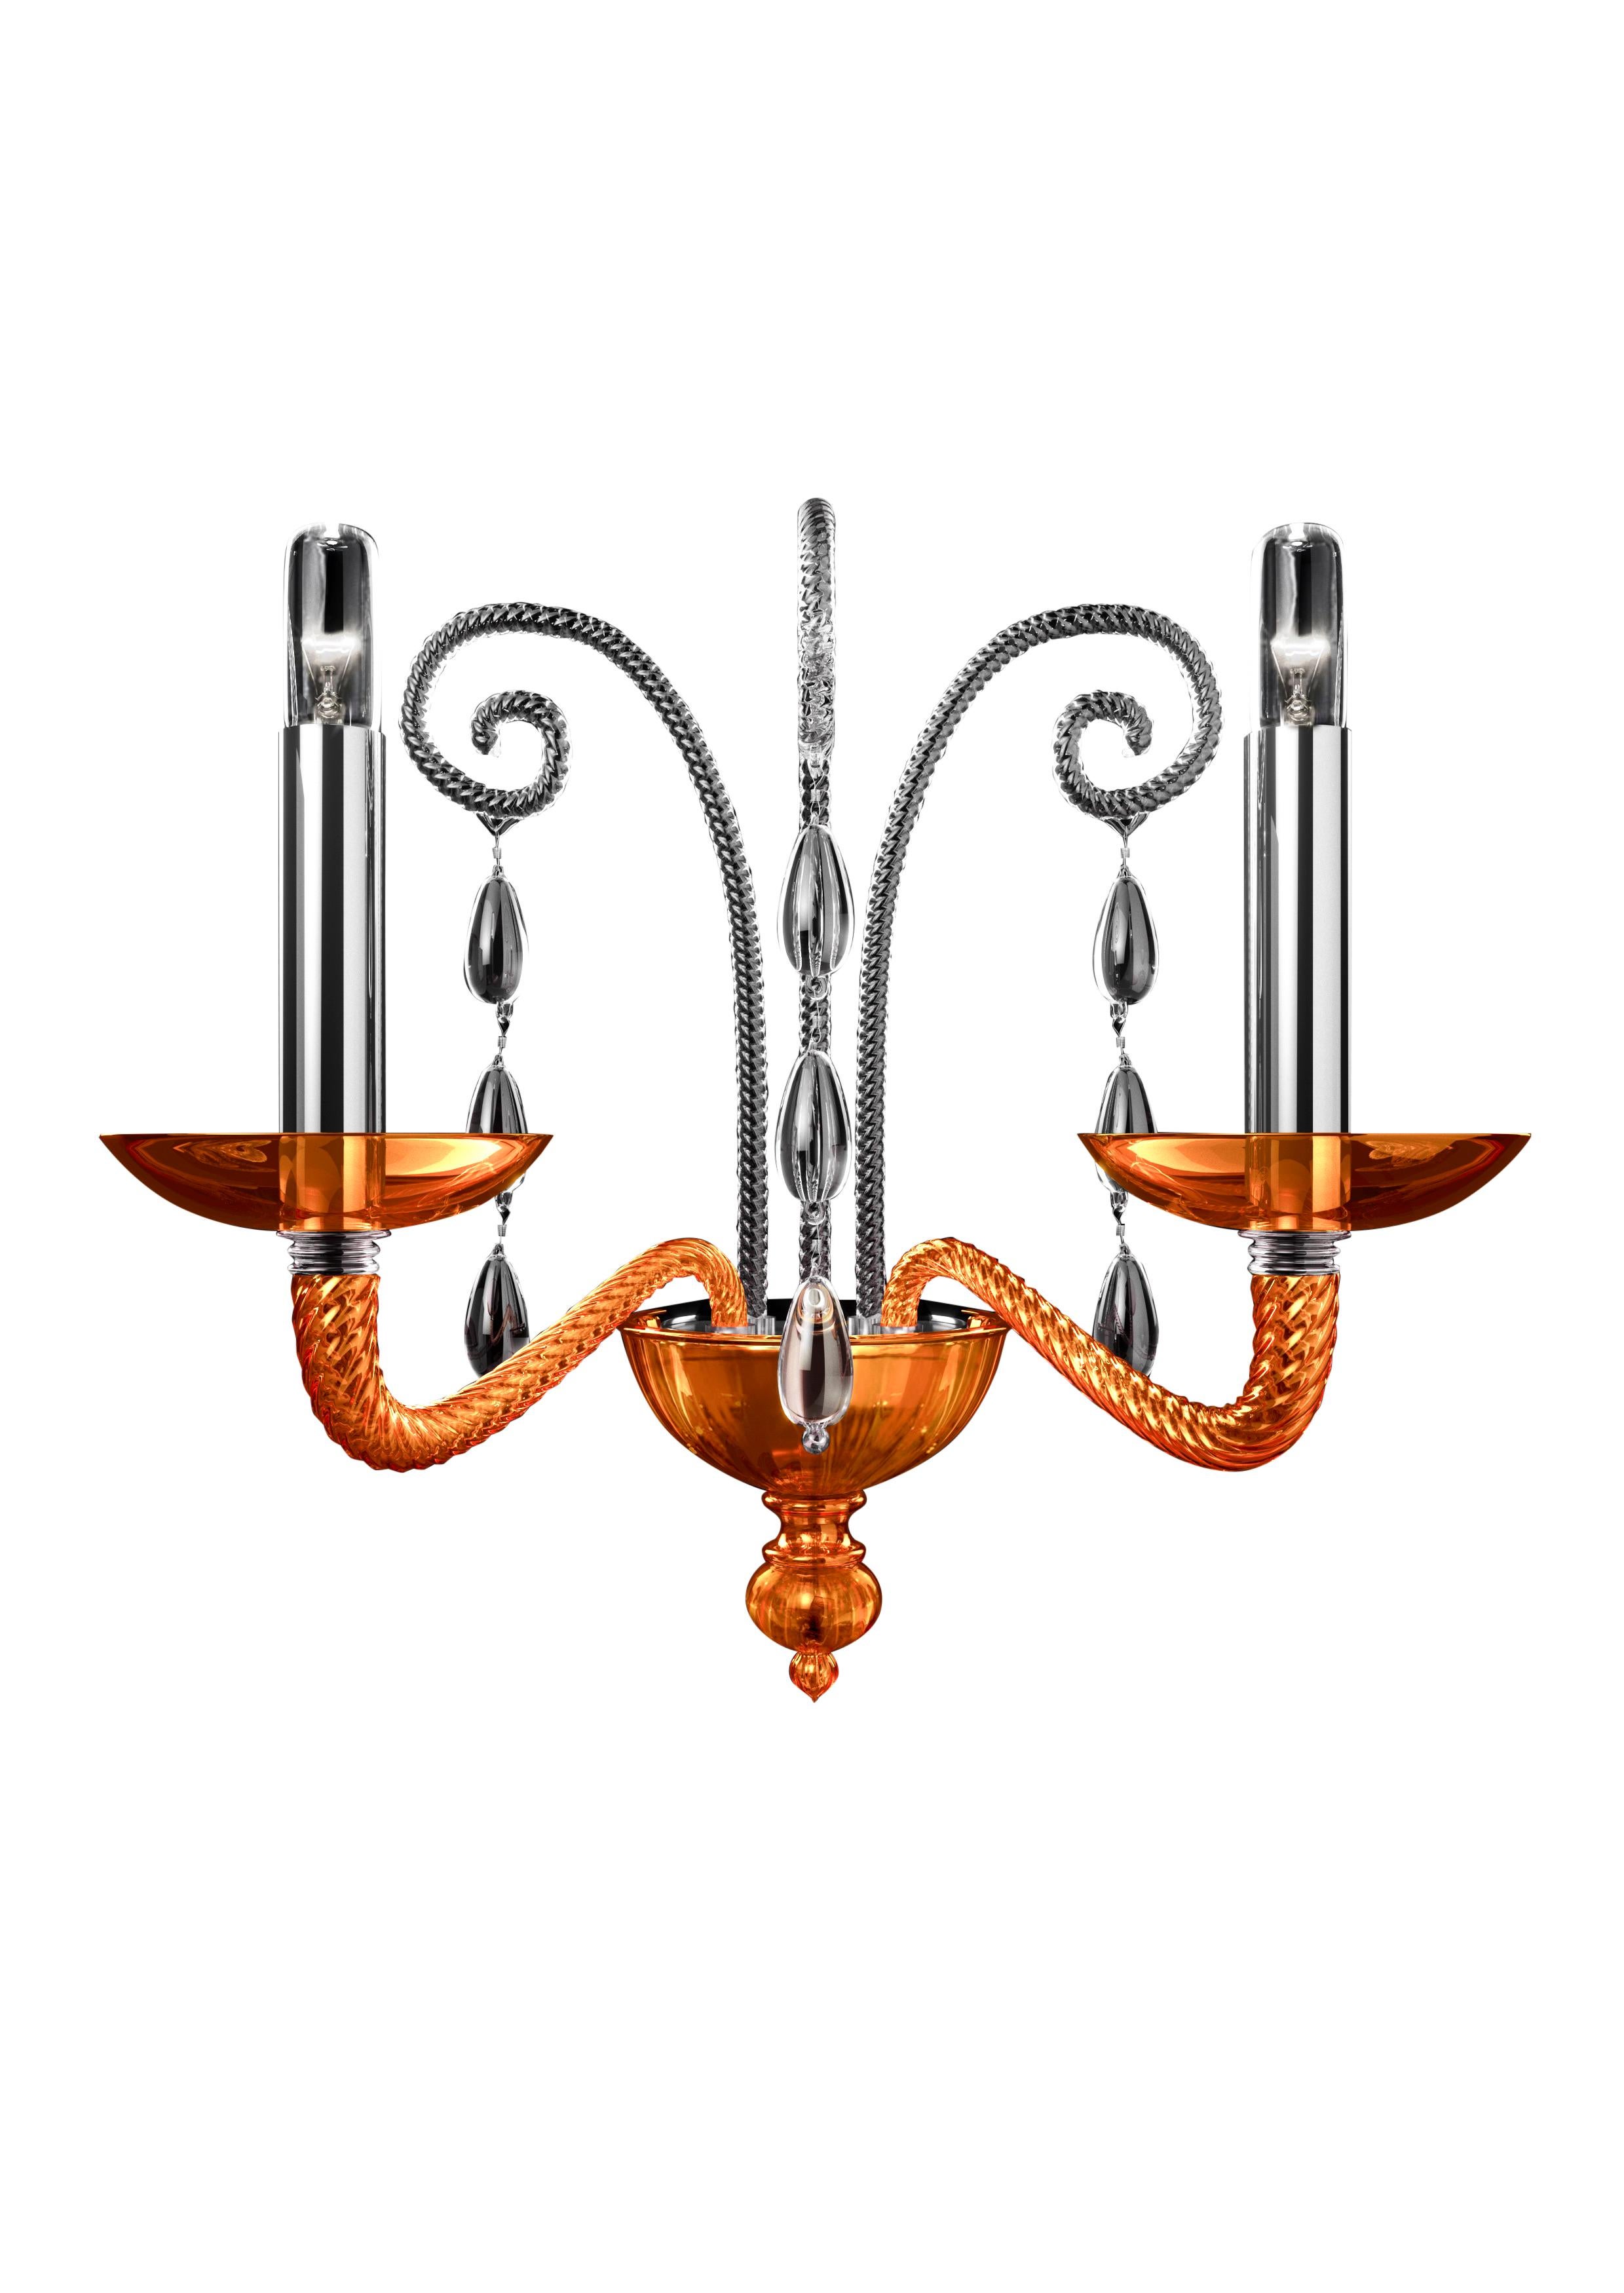 Orange (Liquid Orange_AL) Taymyr 5589 02 Wall Sconce in Glass with Polished Chrome Finish, by Barovier